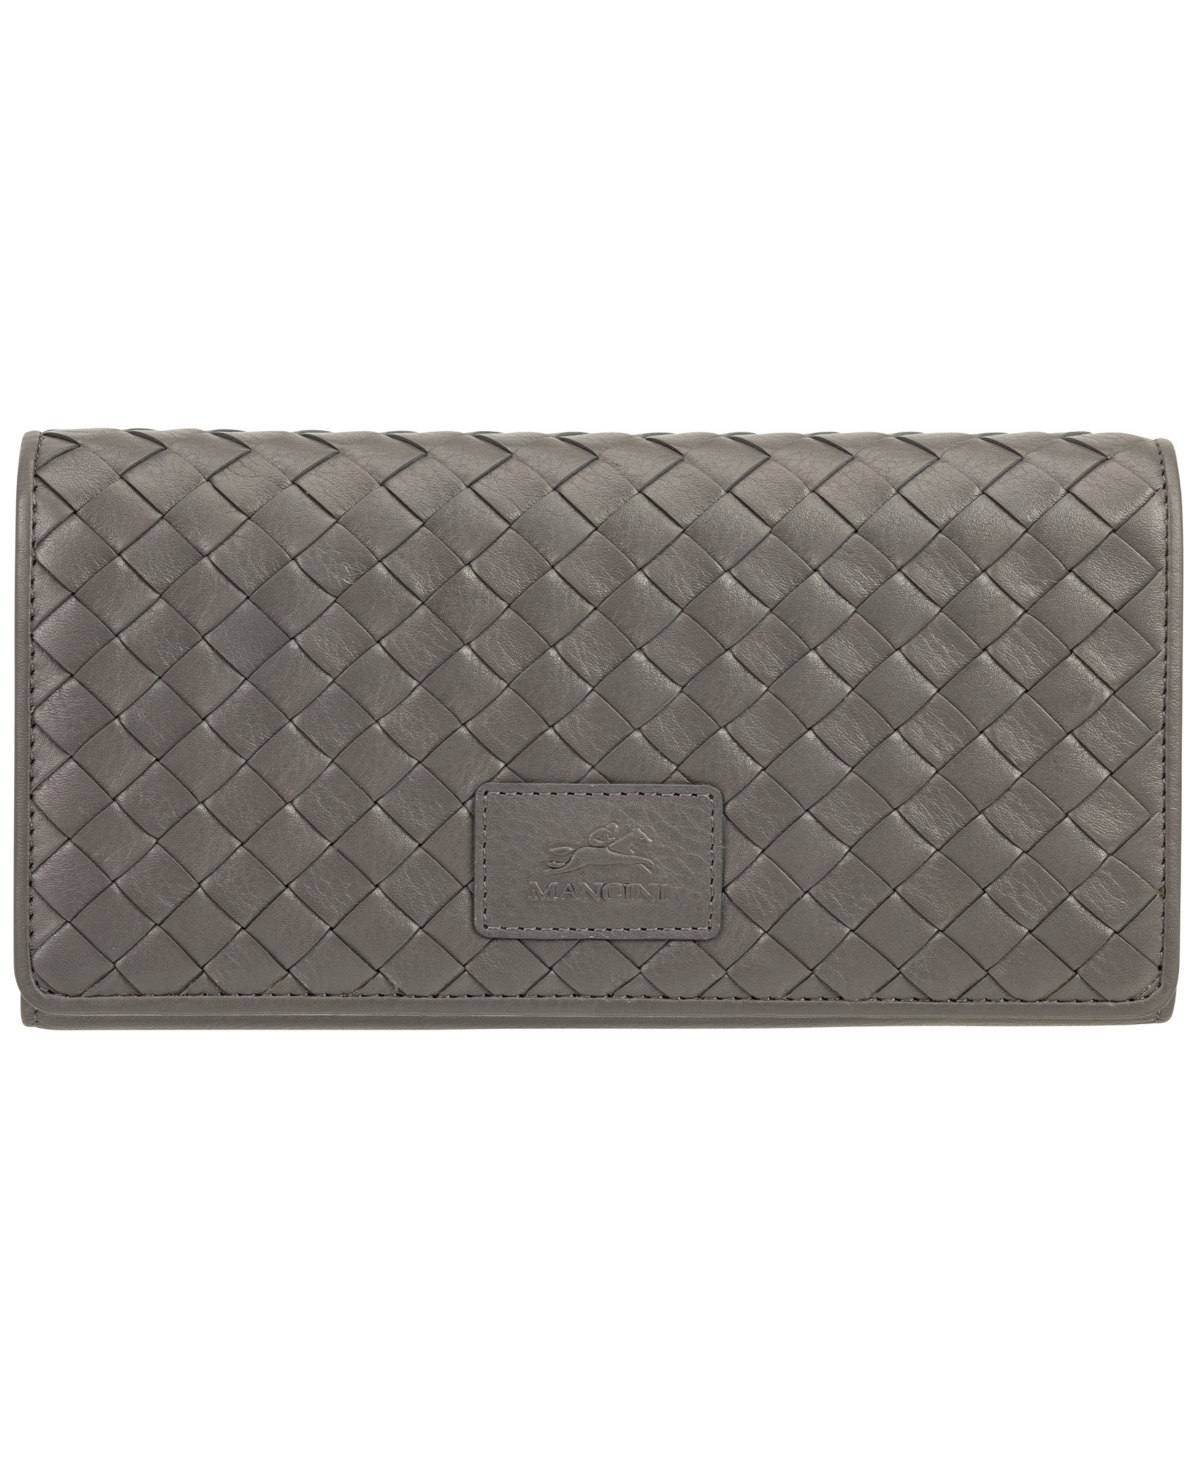 Mancini Women's Basket Weave Collection Rfid Secure Trifold Wallet